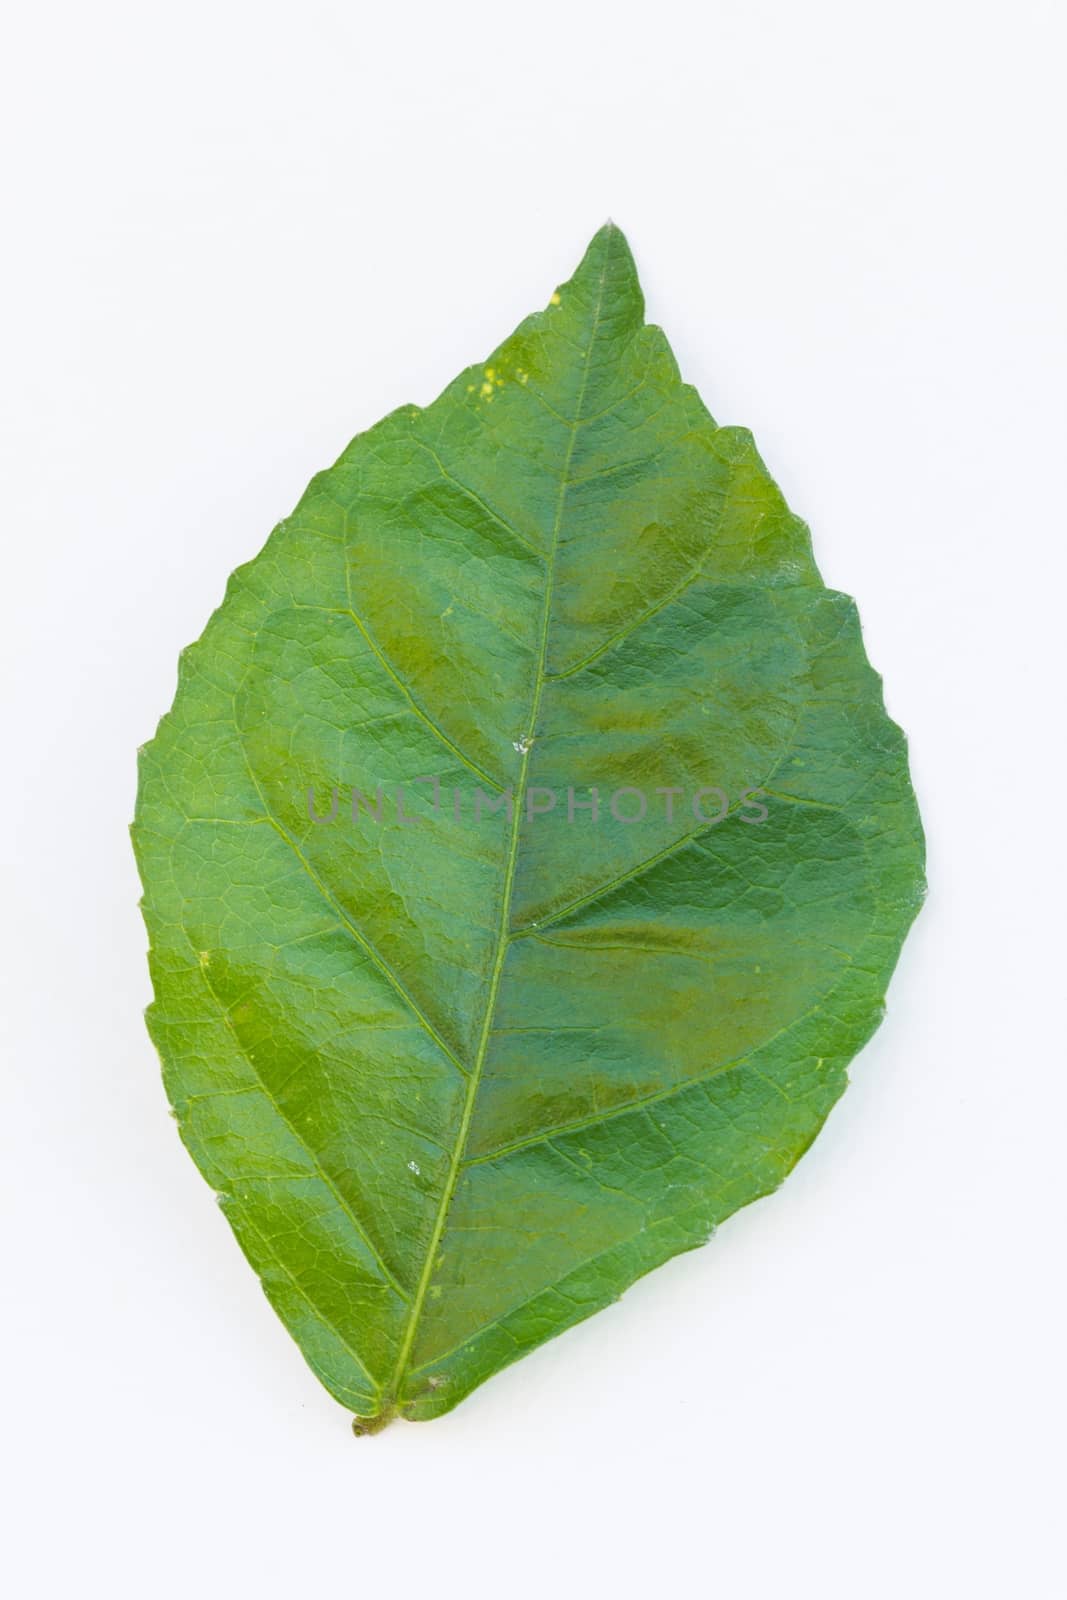 beautiful green leaf isolated on white background.